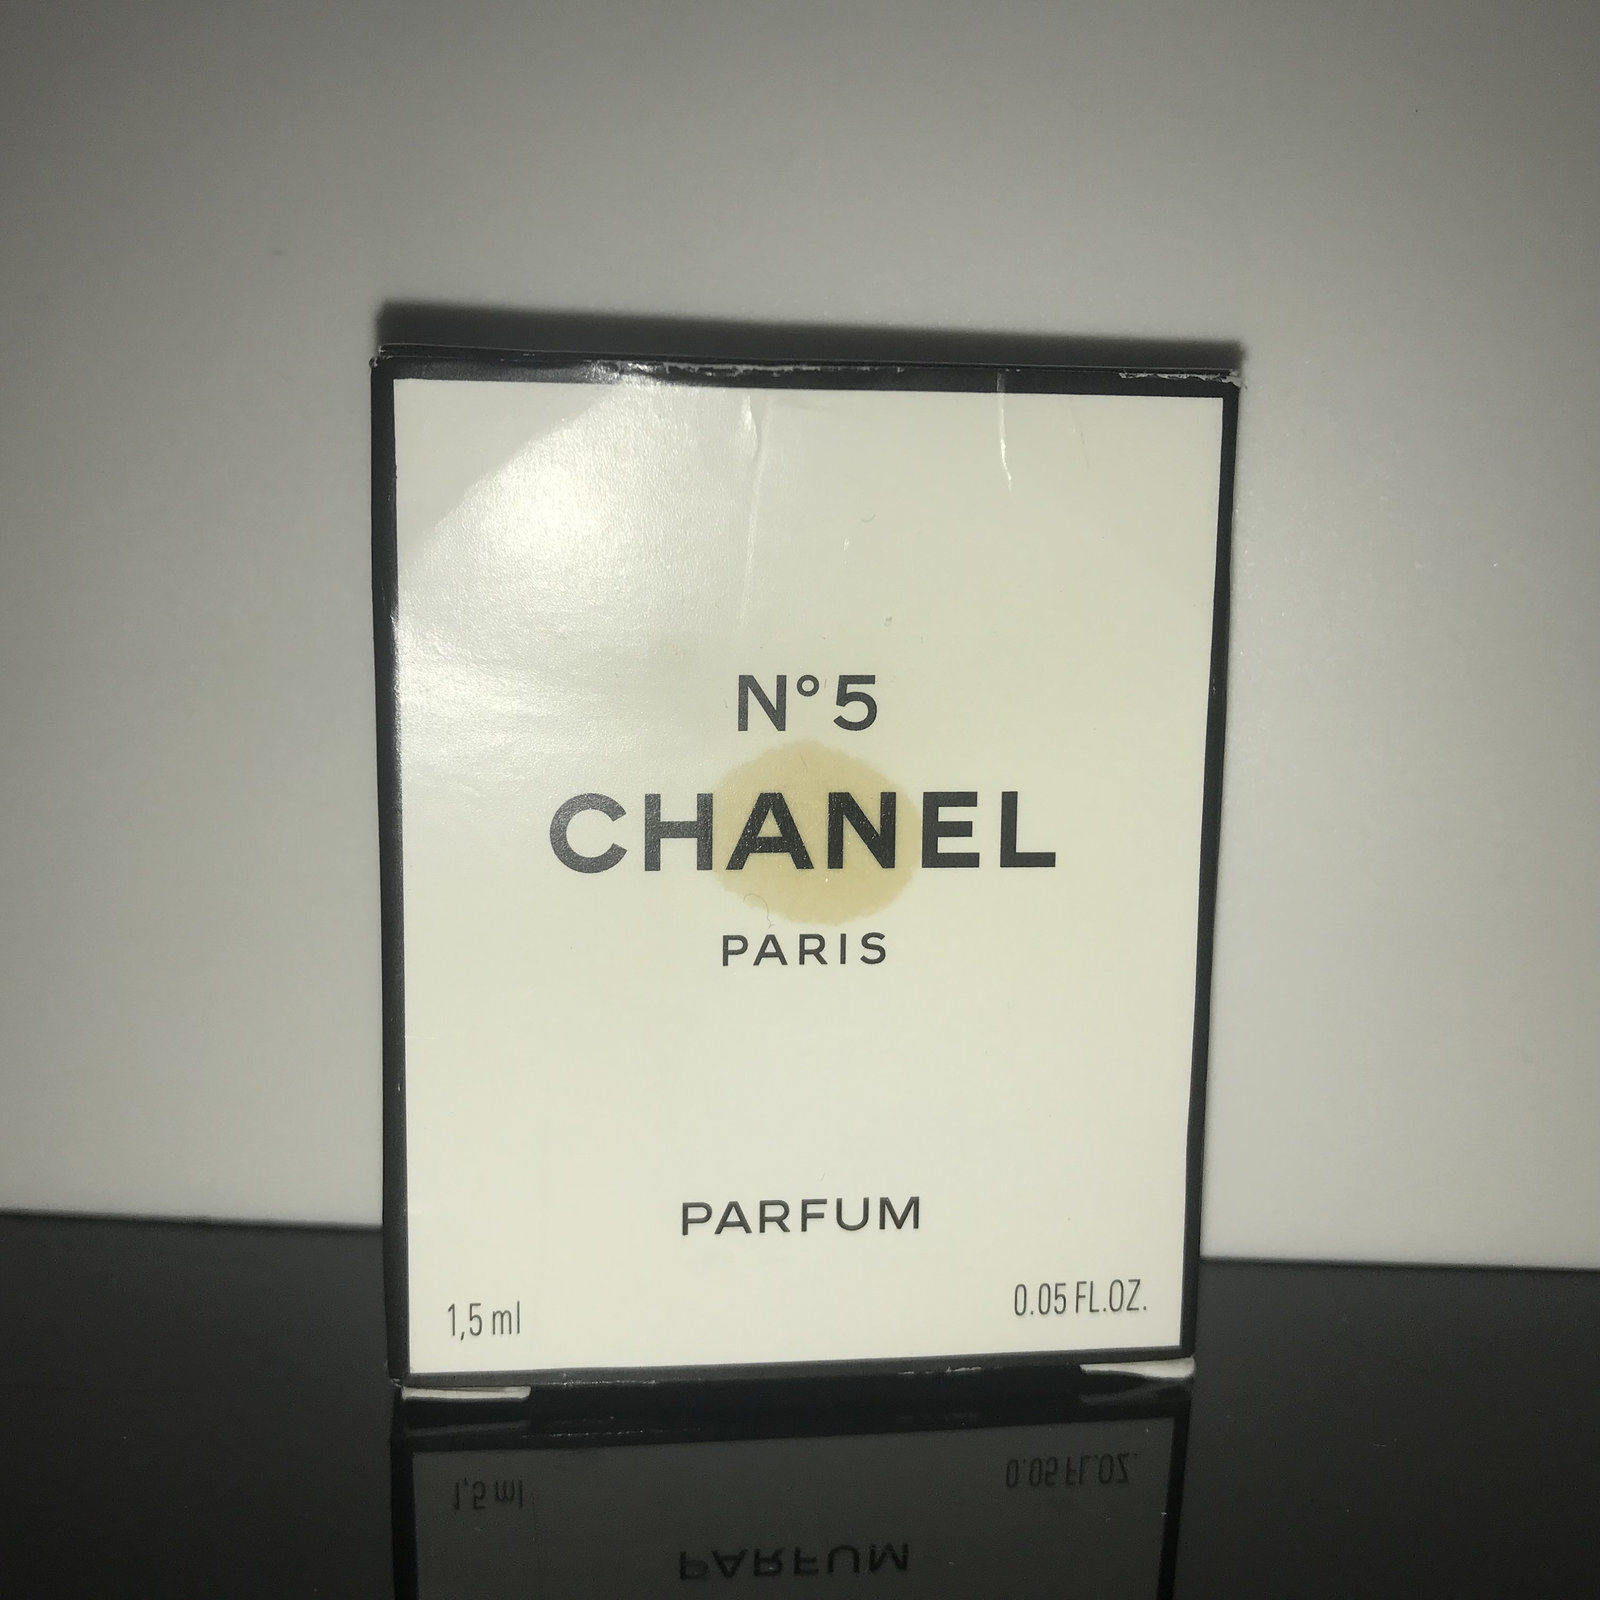 Chanel No. 5 Parfum 0.25oz 7.5ml Rechargeable Refillable Spray New Vintage